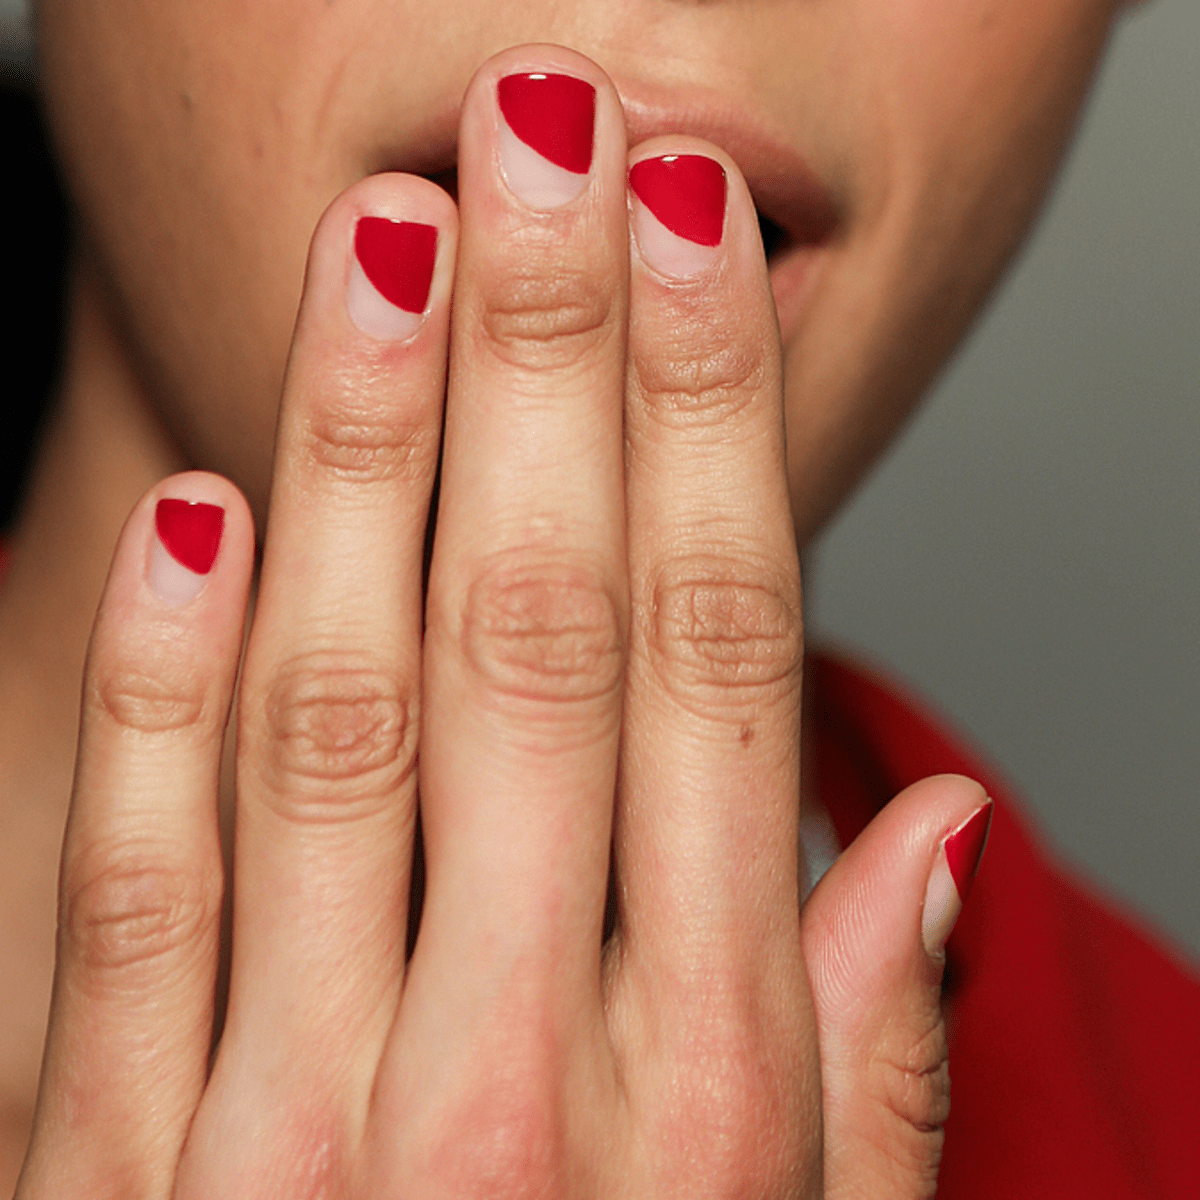 5 Fall Nail Trends Experts Say You Should Try For The Season